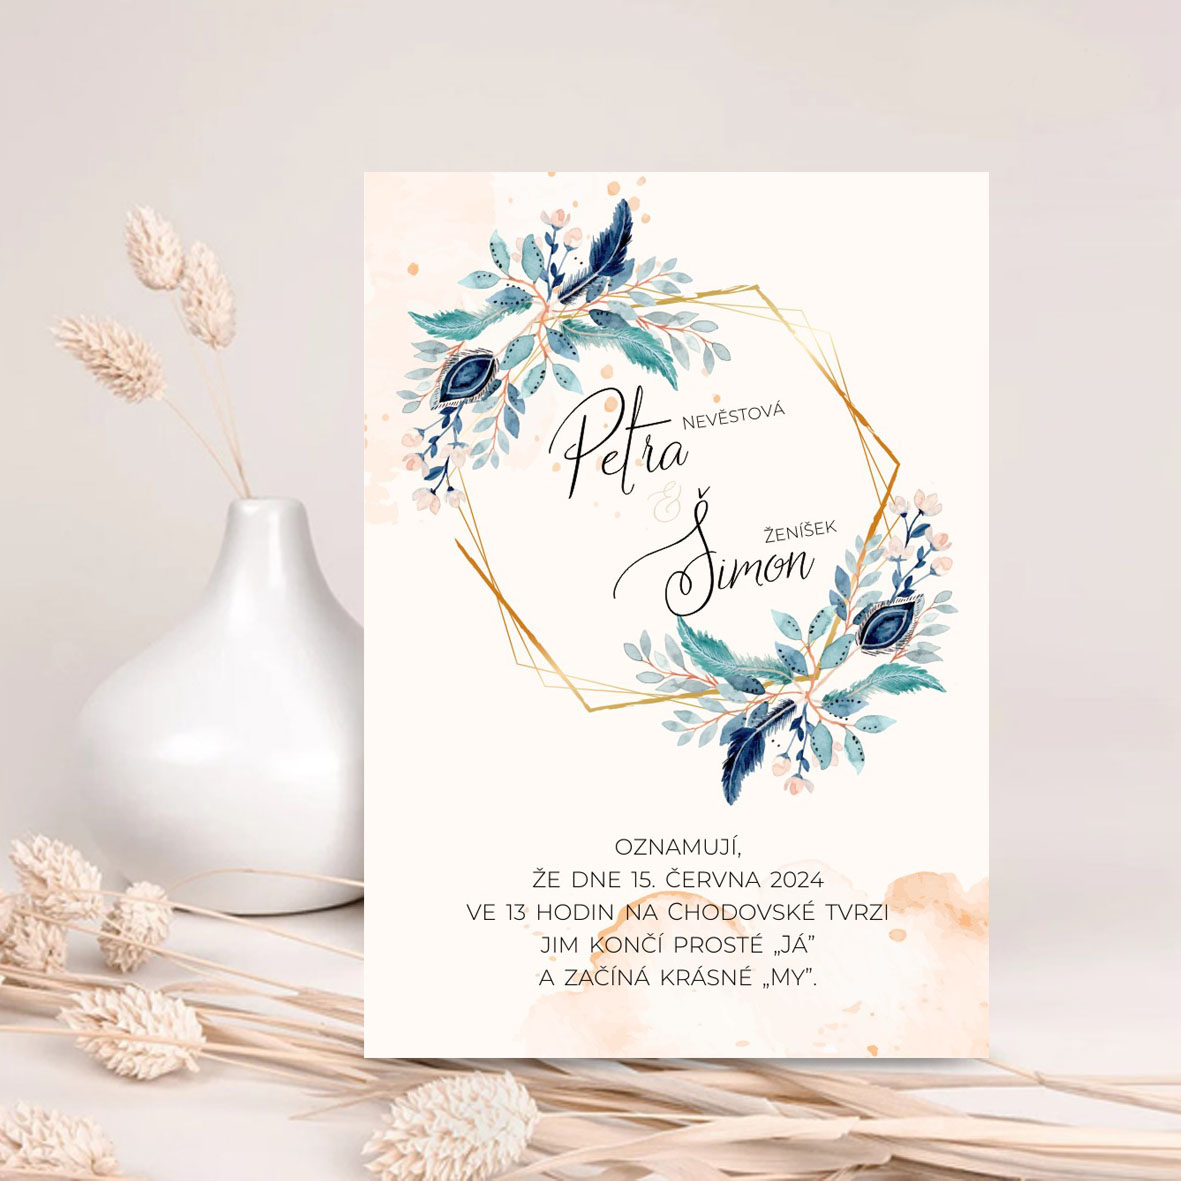 Wedding invitation with turquoise flowers